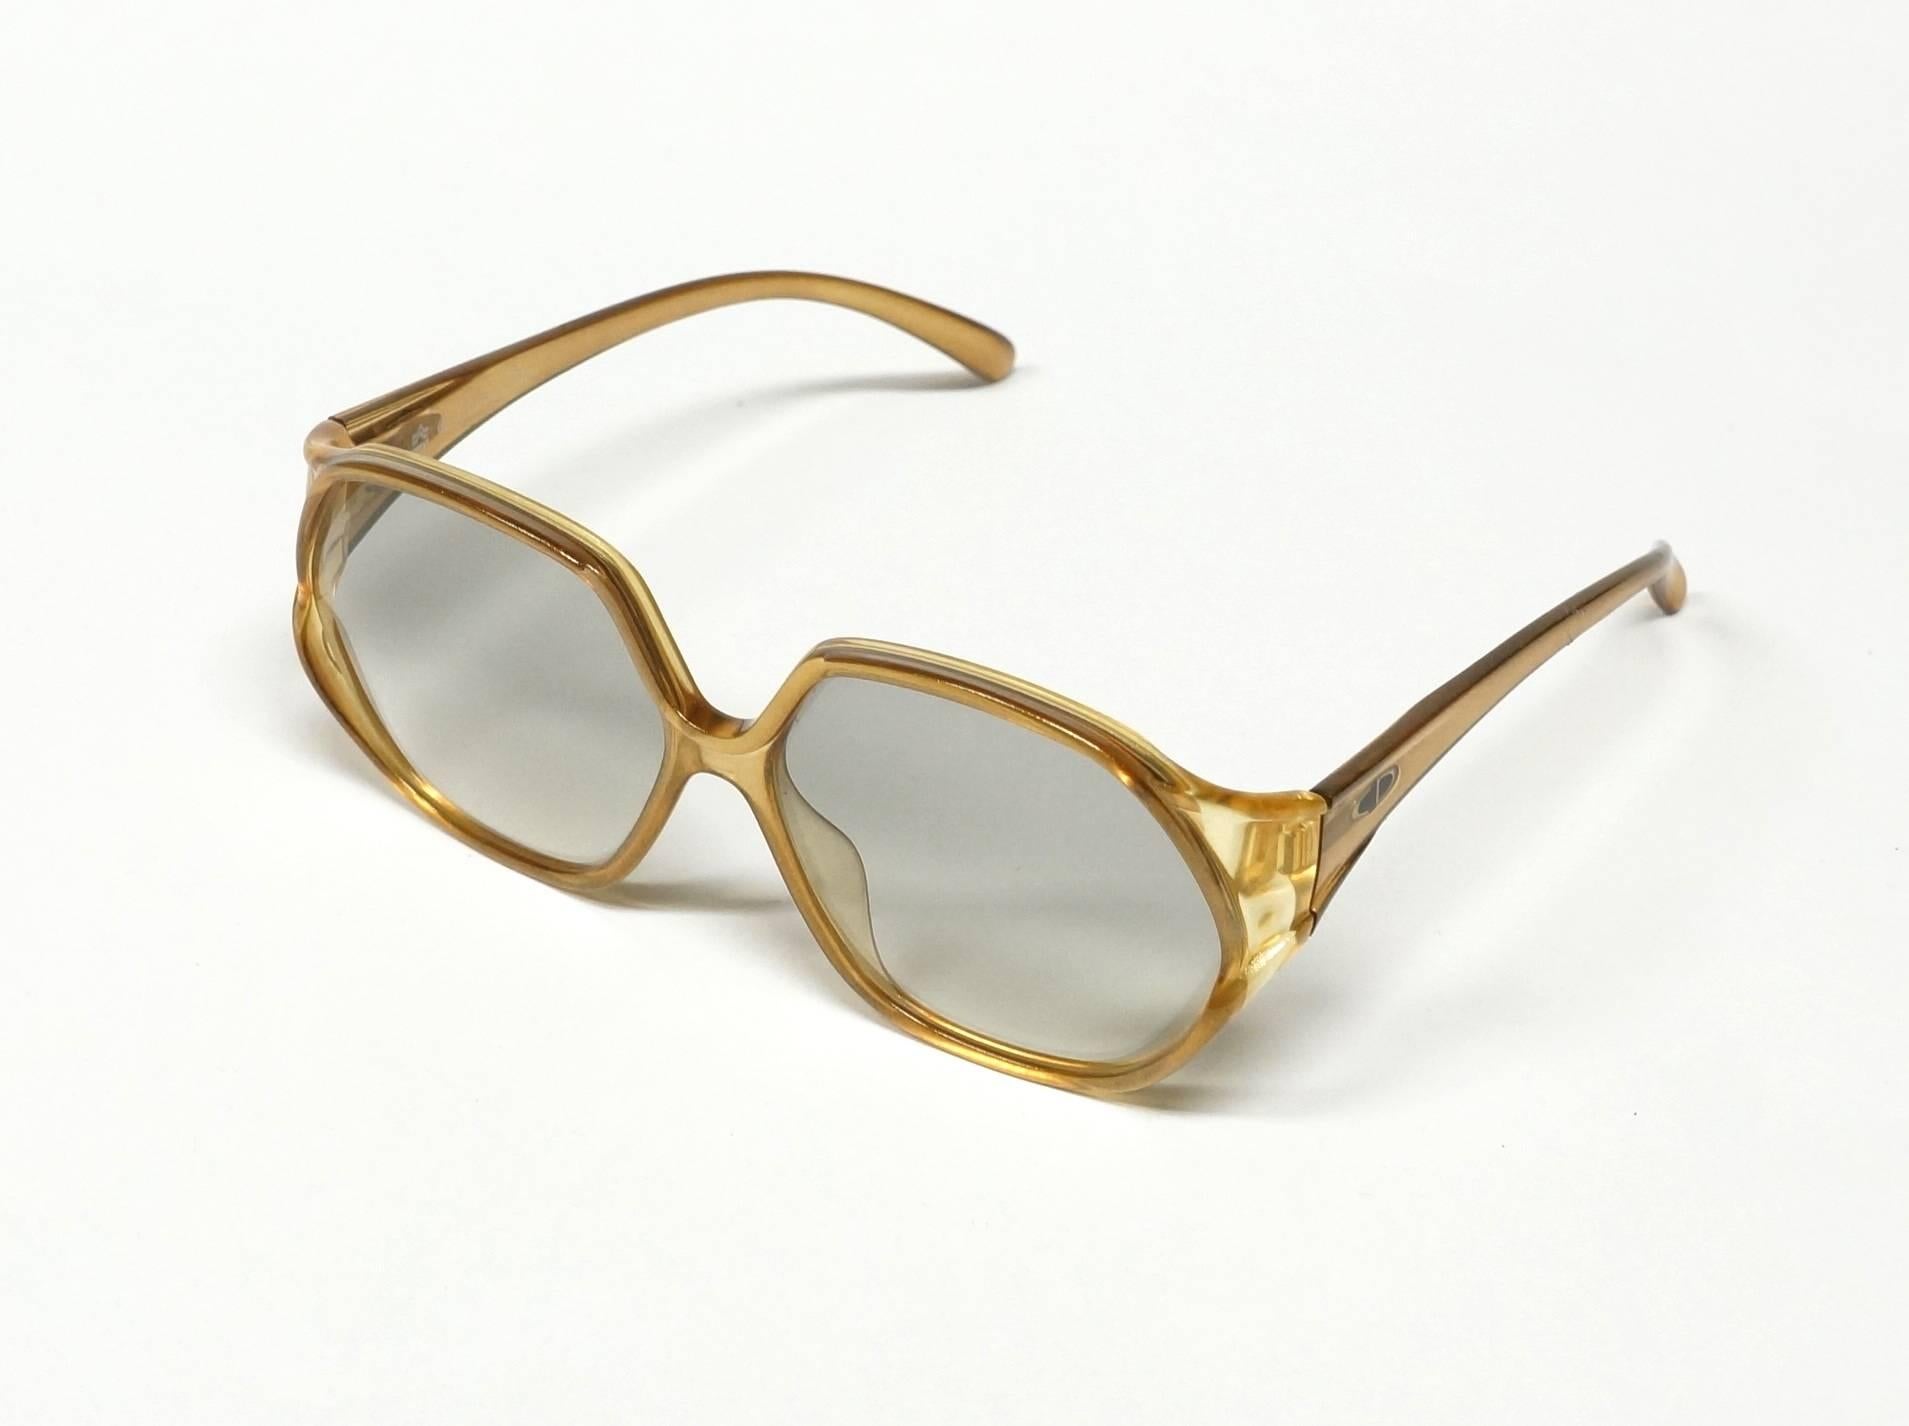 Women's 1970s Dior Oversized Sunglasses in New Old Stock Condition For Sale